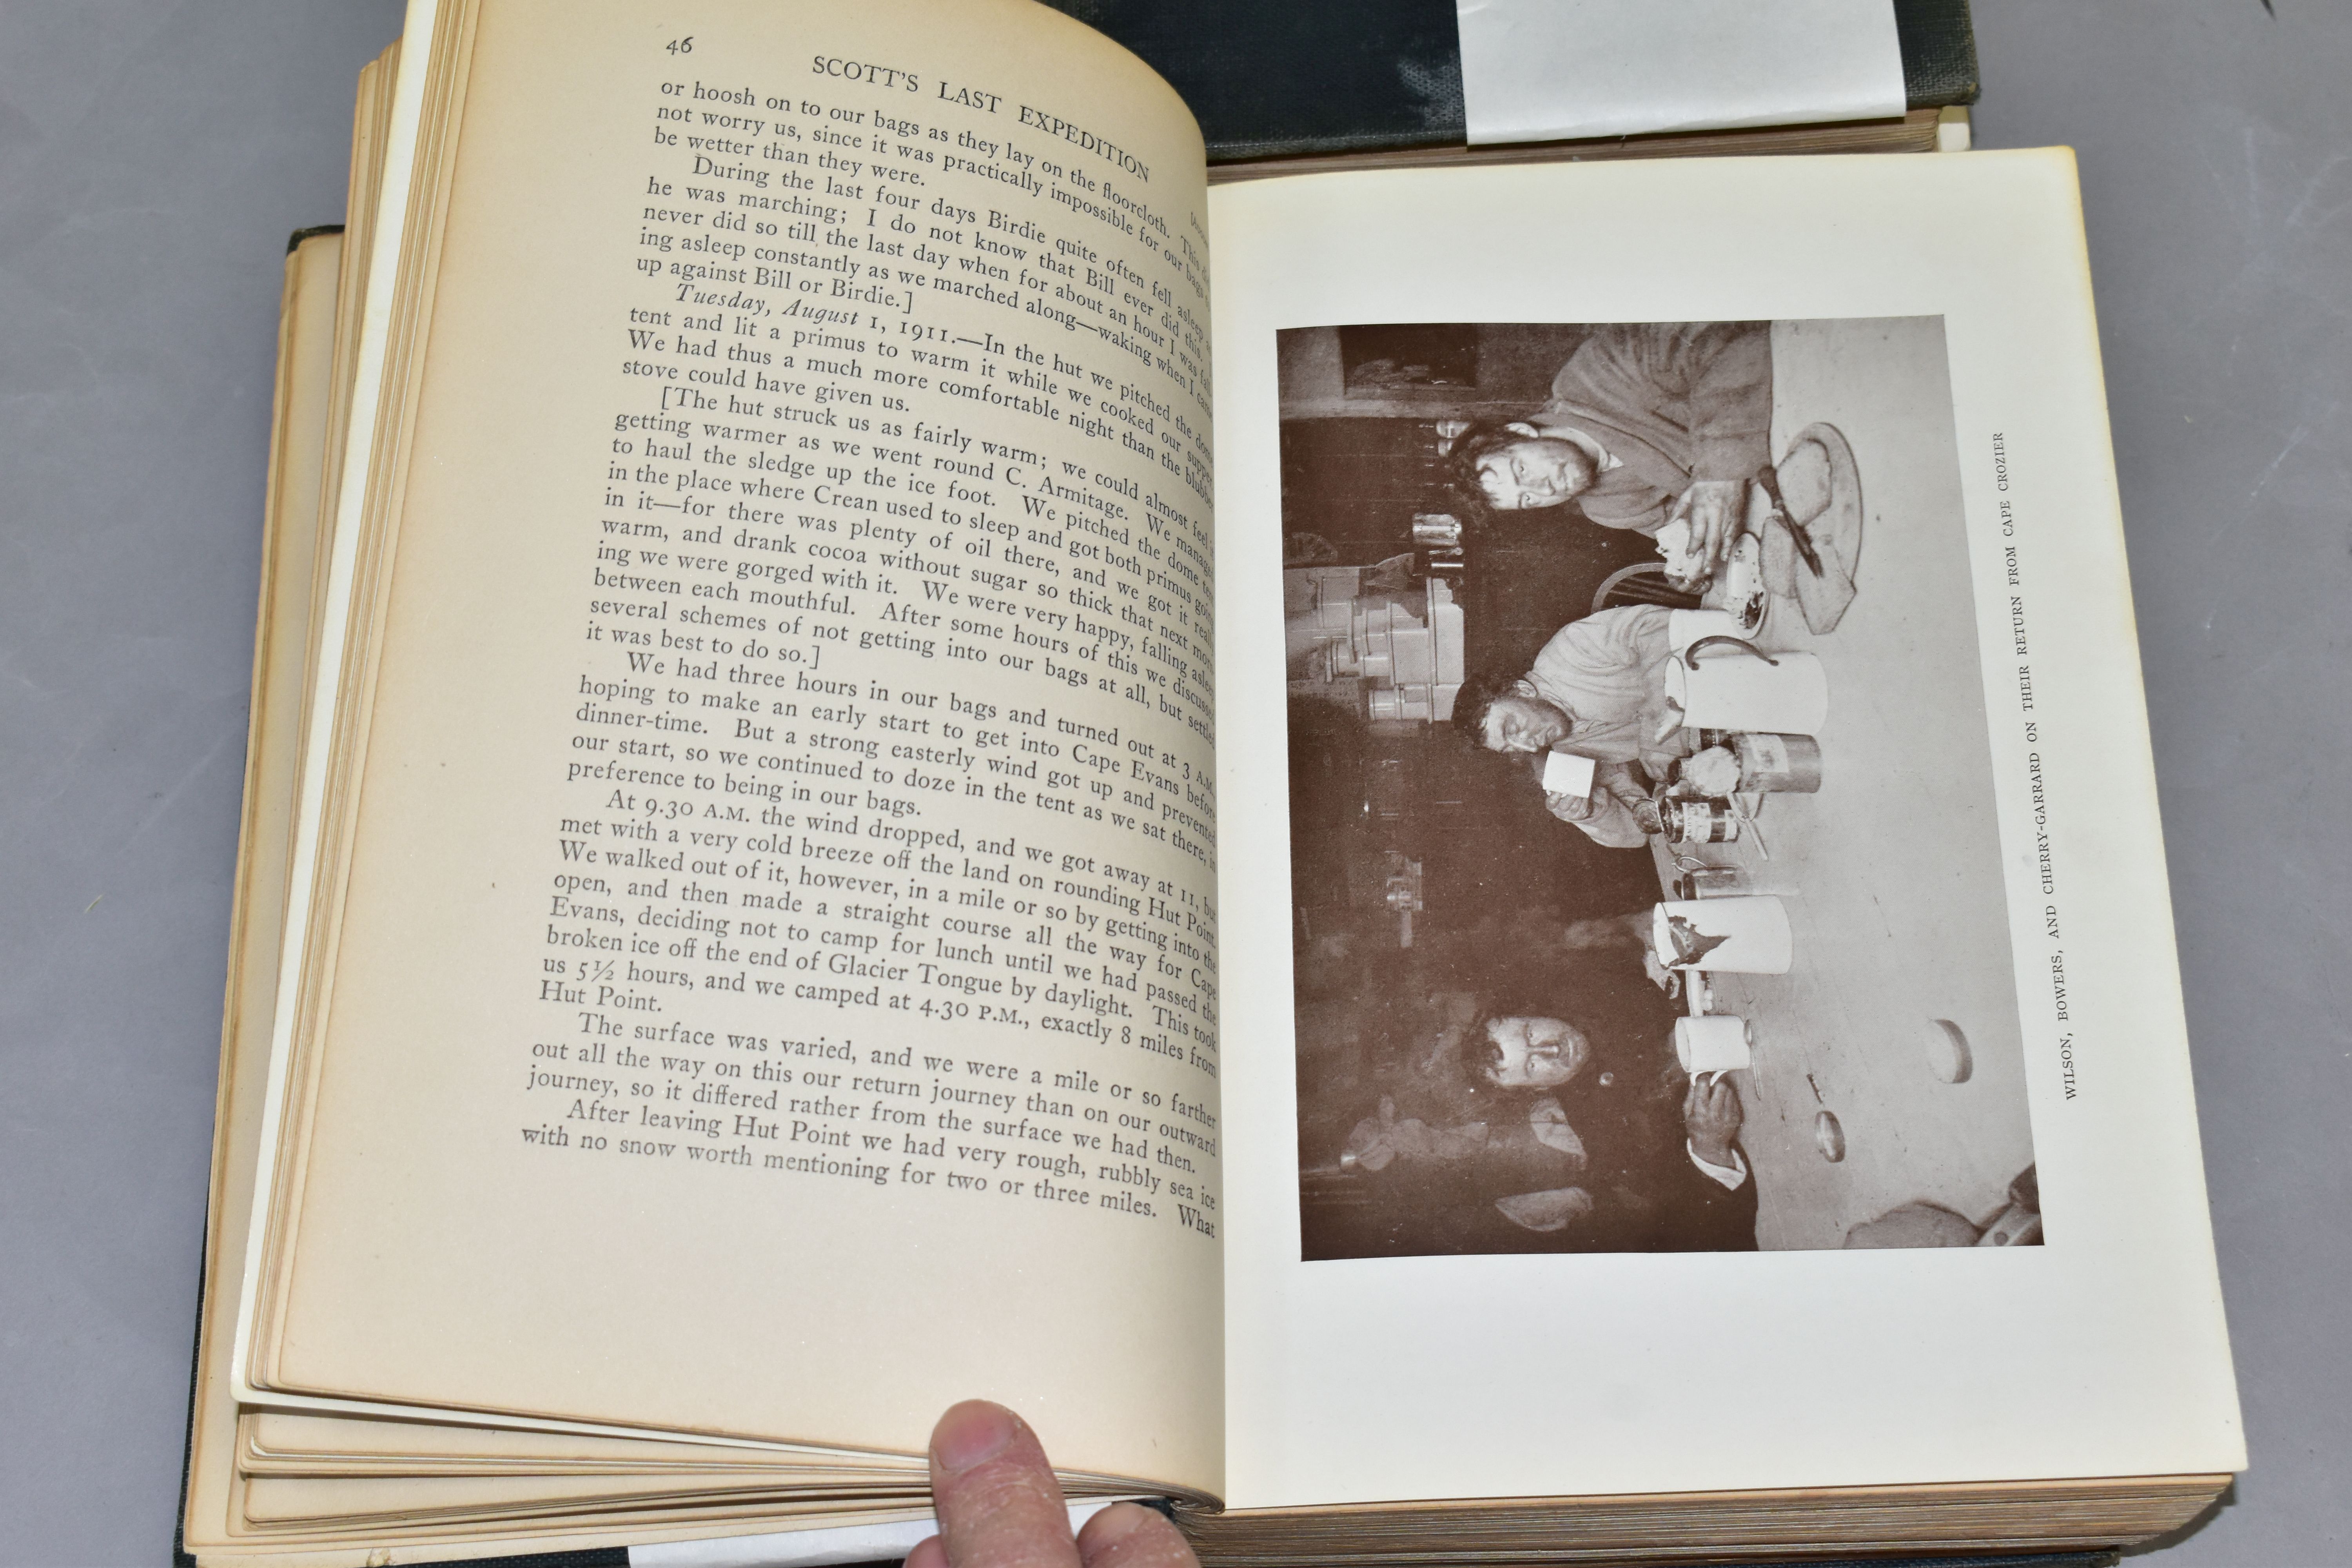 SCOTT'S LAST EXPEDITION, Vols.1 & 2, American 1st Edition published by McClellend and Goodchild, - Image 10 of 12